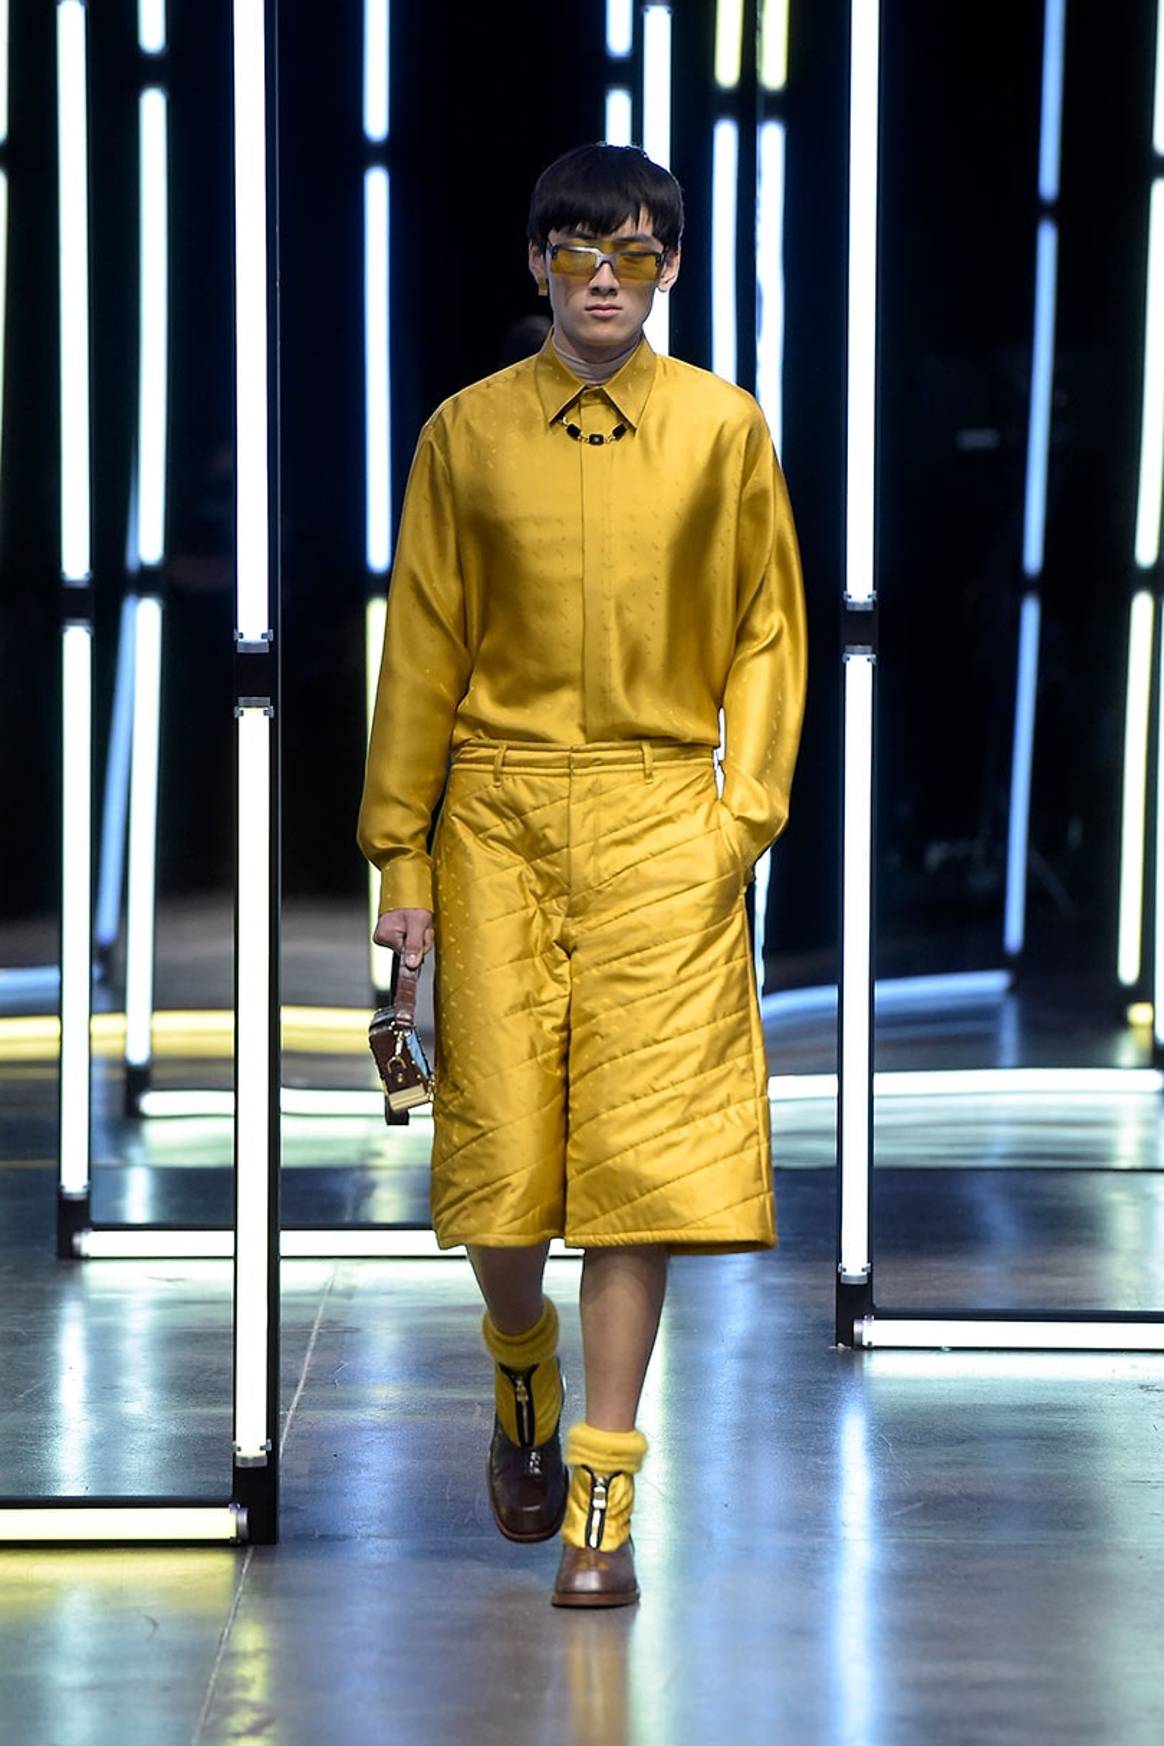 Milan menswear trends reflect the need for a brighter AW21